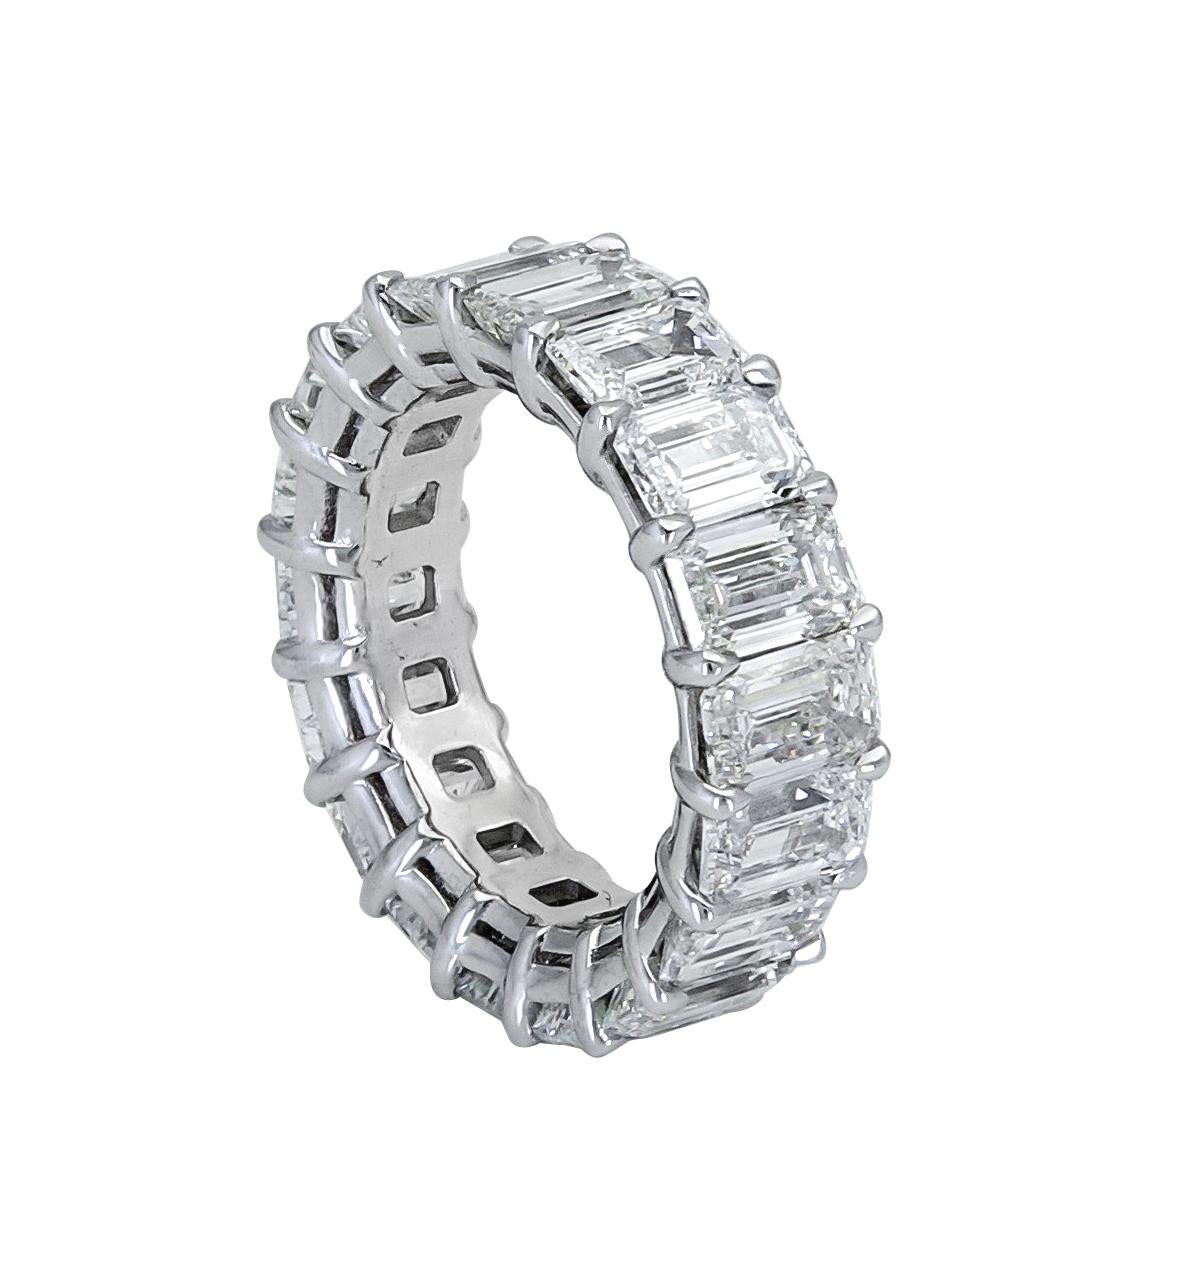 A timeless classic. Features a row of emerald cut diamonds set in an open-gallery eternity design made in platinum.
Diamonds weigh 9.95 carats total. Approximately G-H color, VS clarity.
Size 6.5 US.